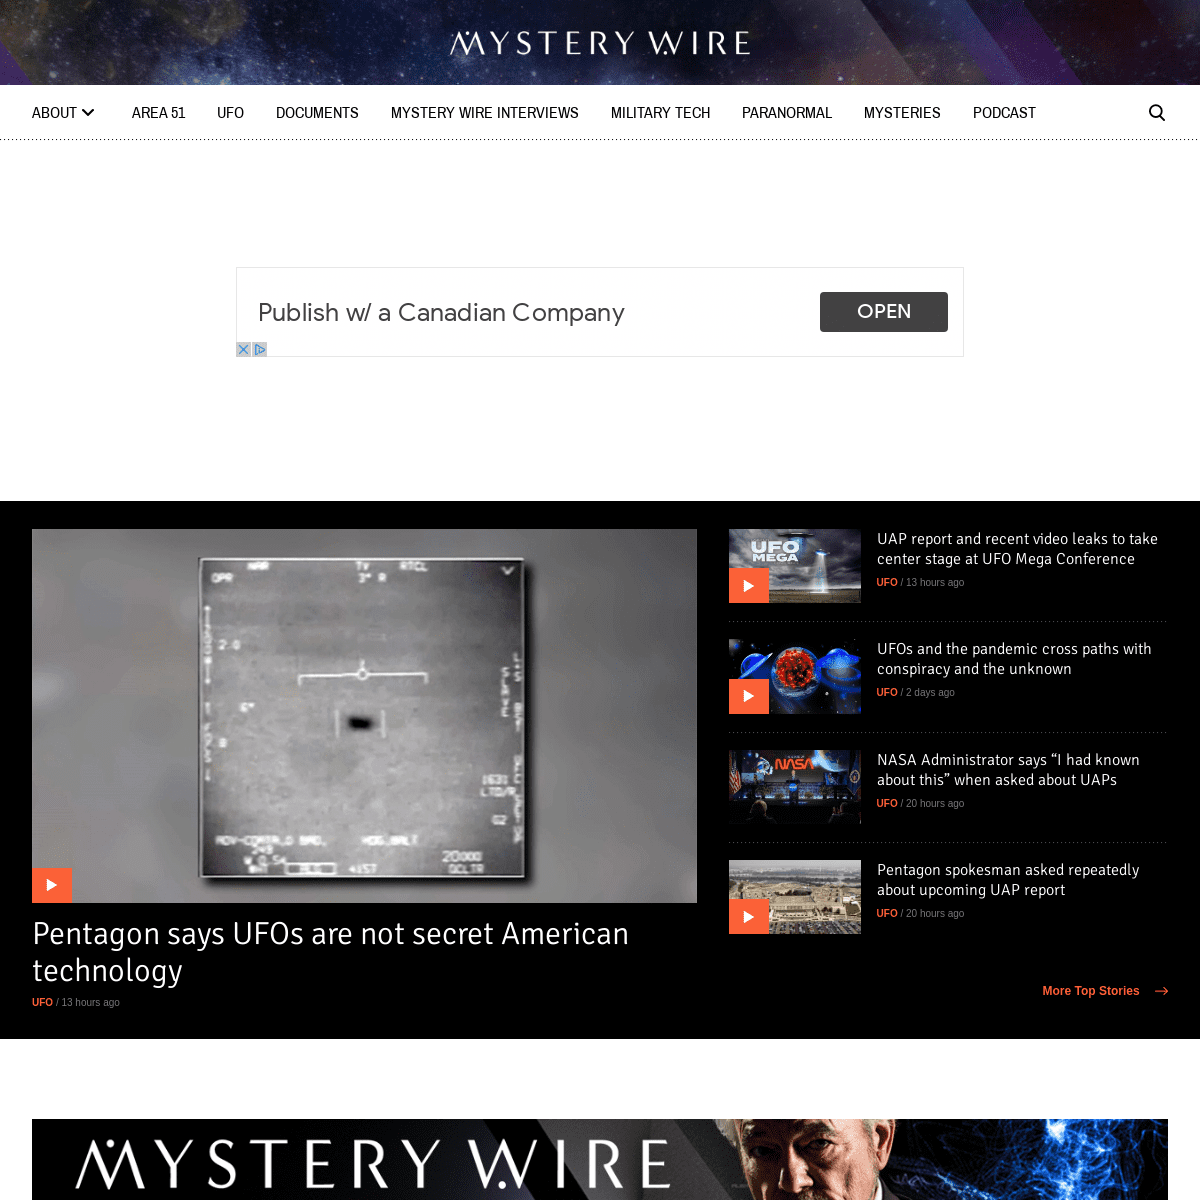 A complete backup of https://mysterywire.com